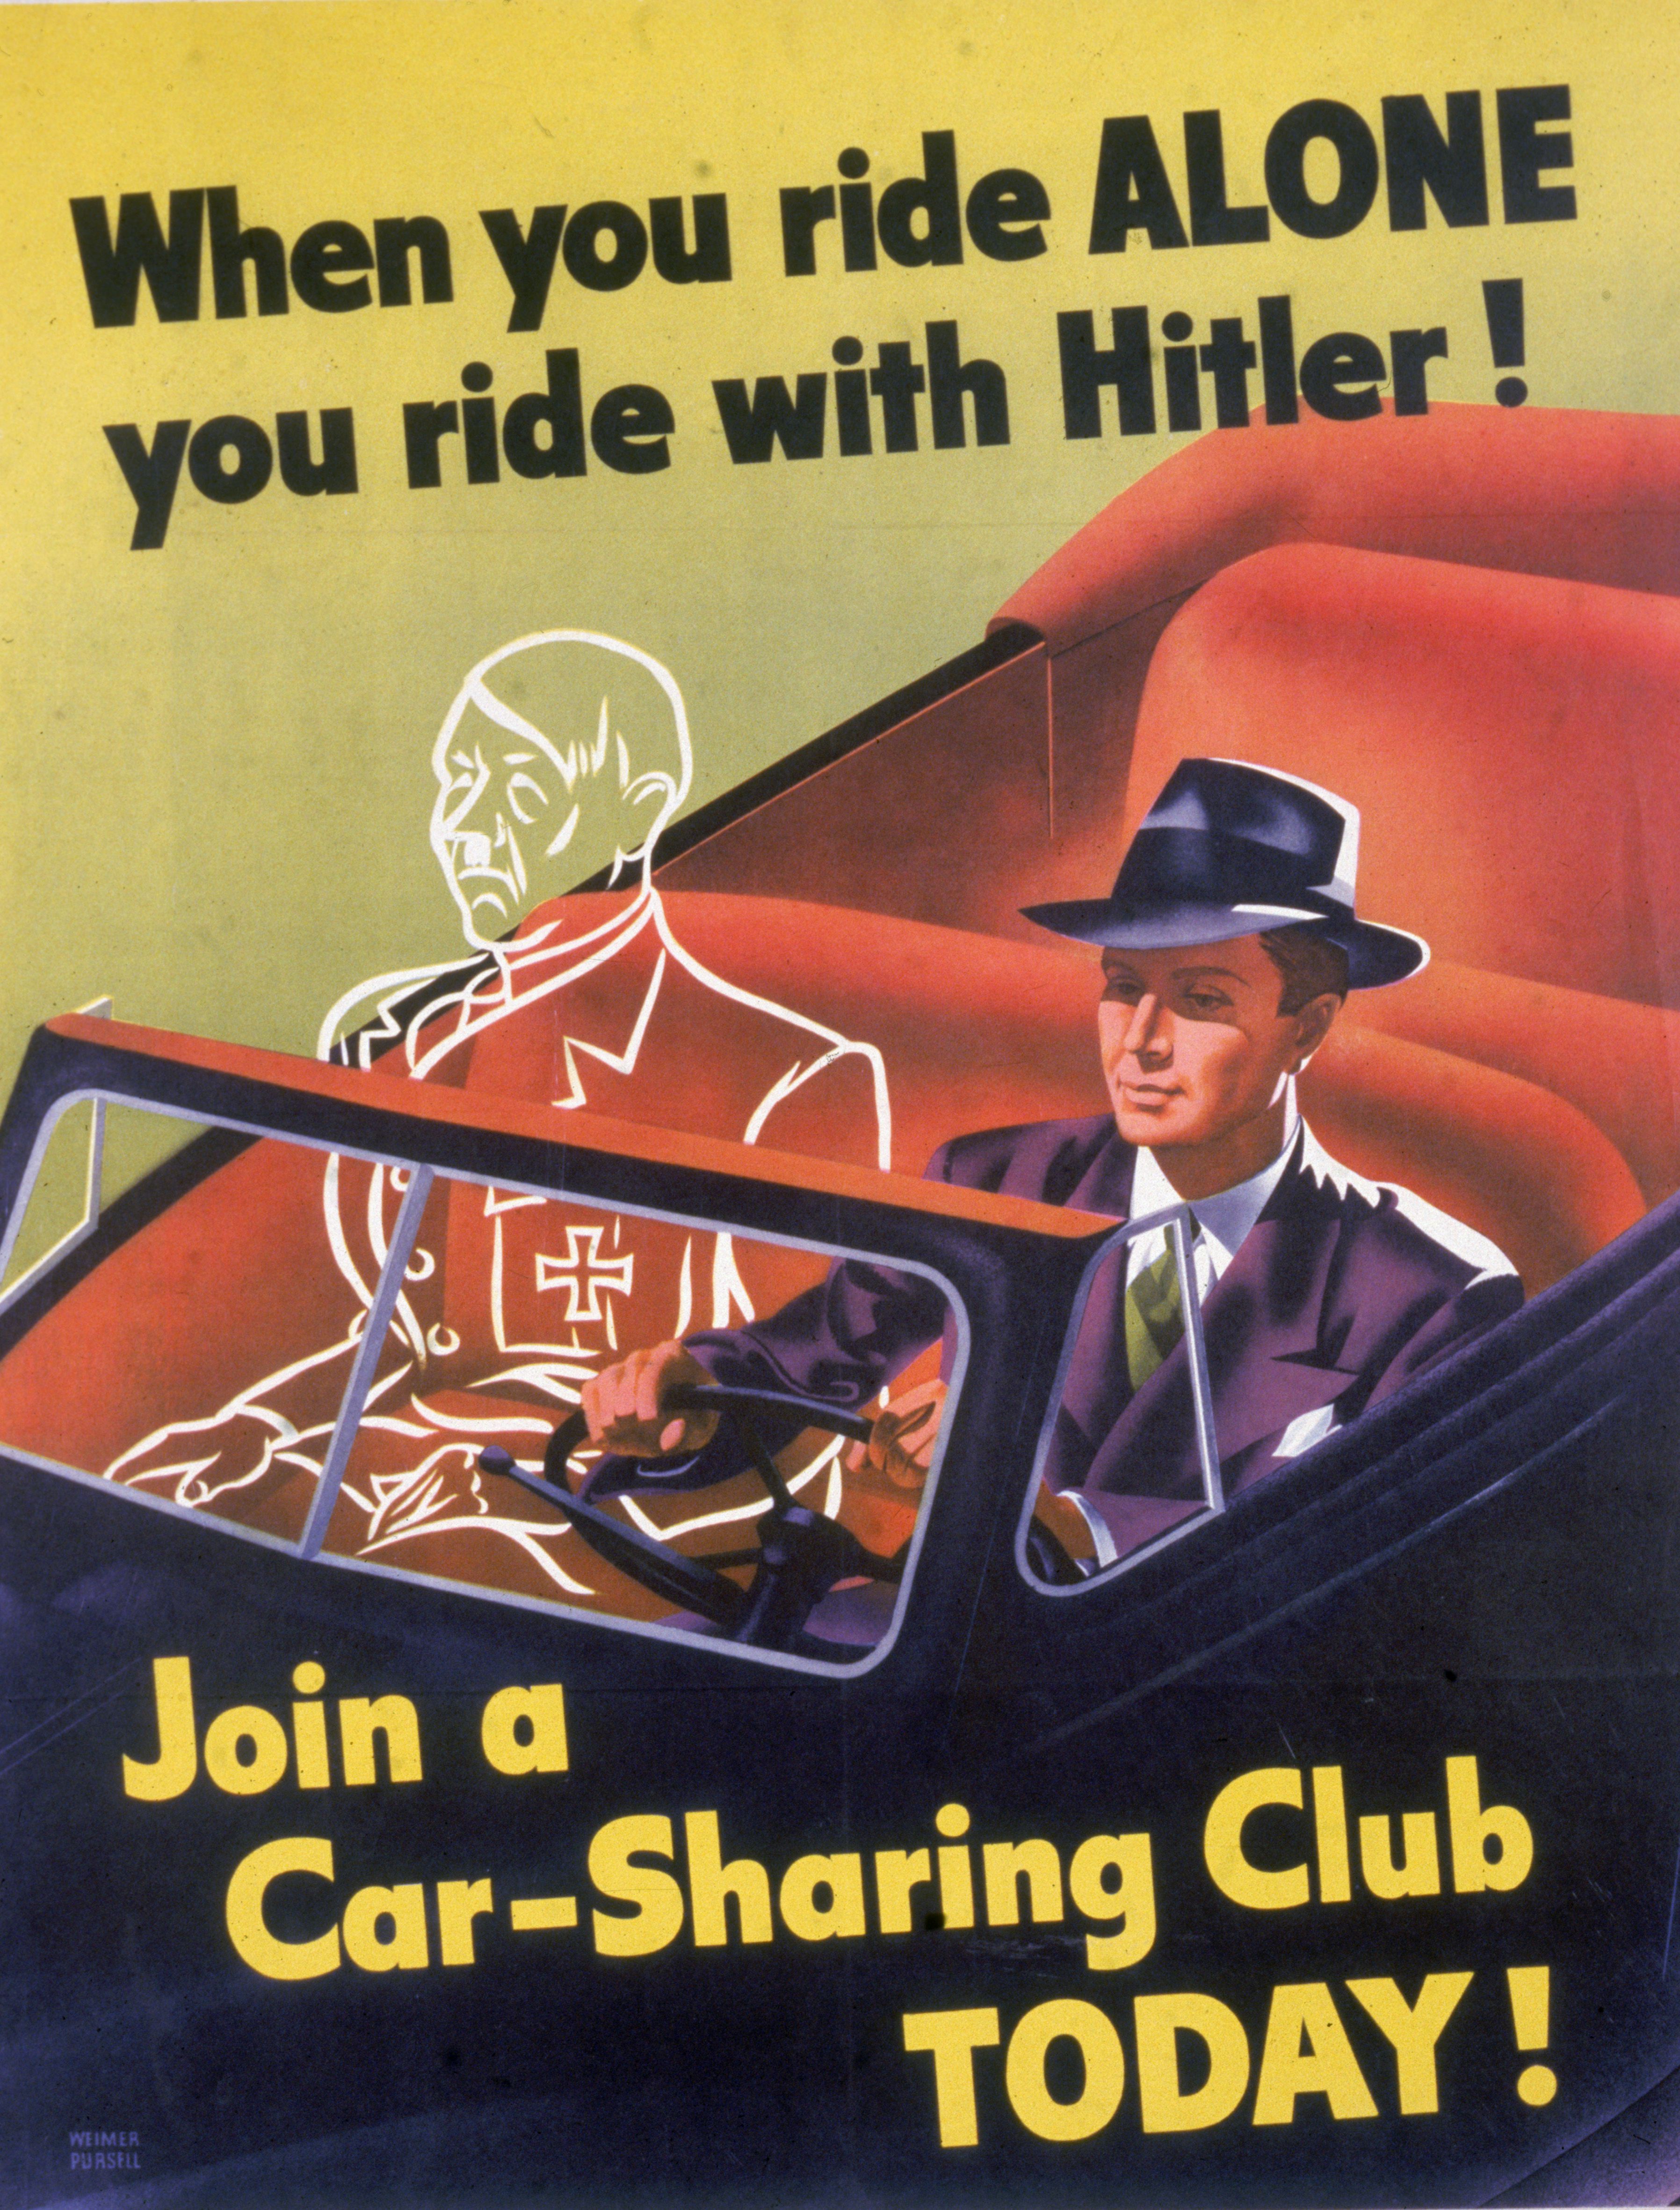 When you ride alone, you ride with Hitler - Weimer Pursell, Public domain, via Wikimedia Commons